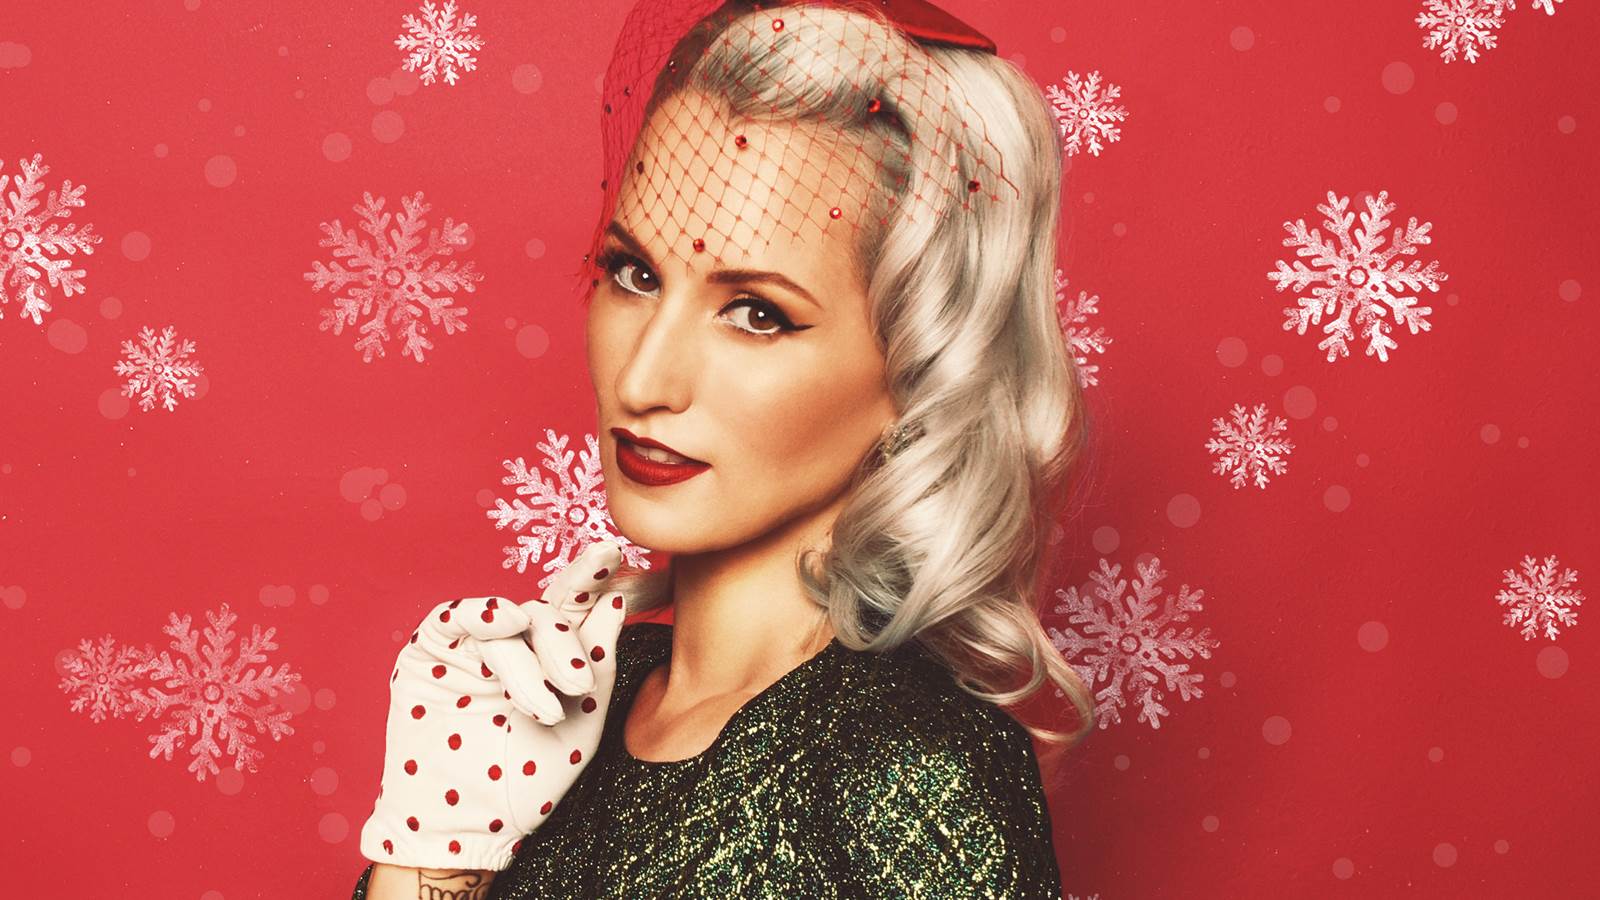 National Symphony Orchestra Presents “A Holiday Pops” with Ingrid Michaelson